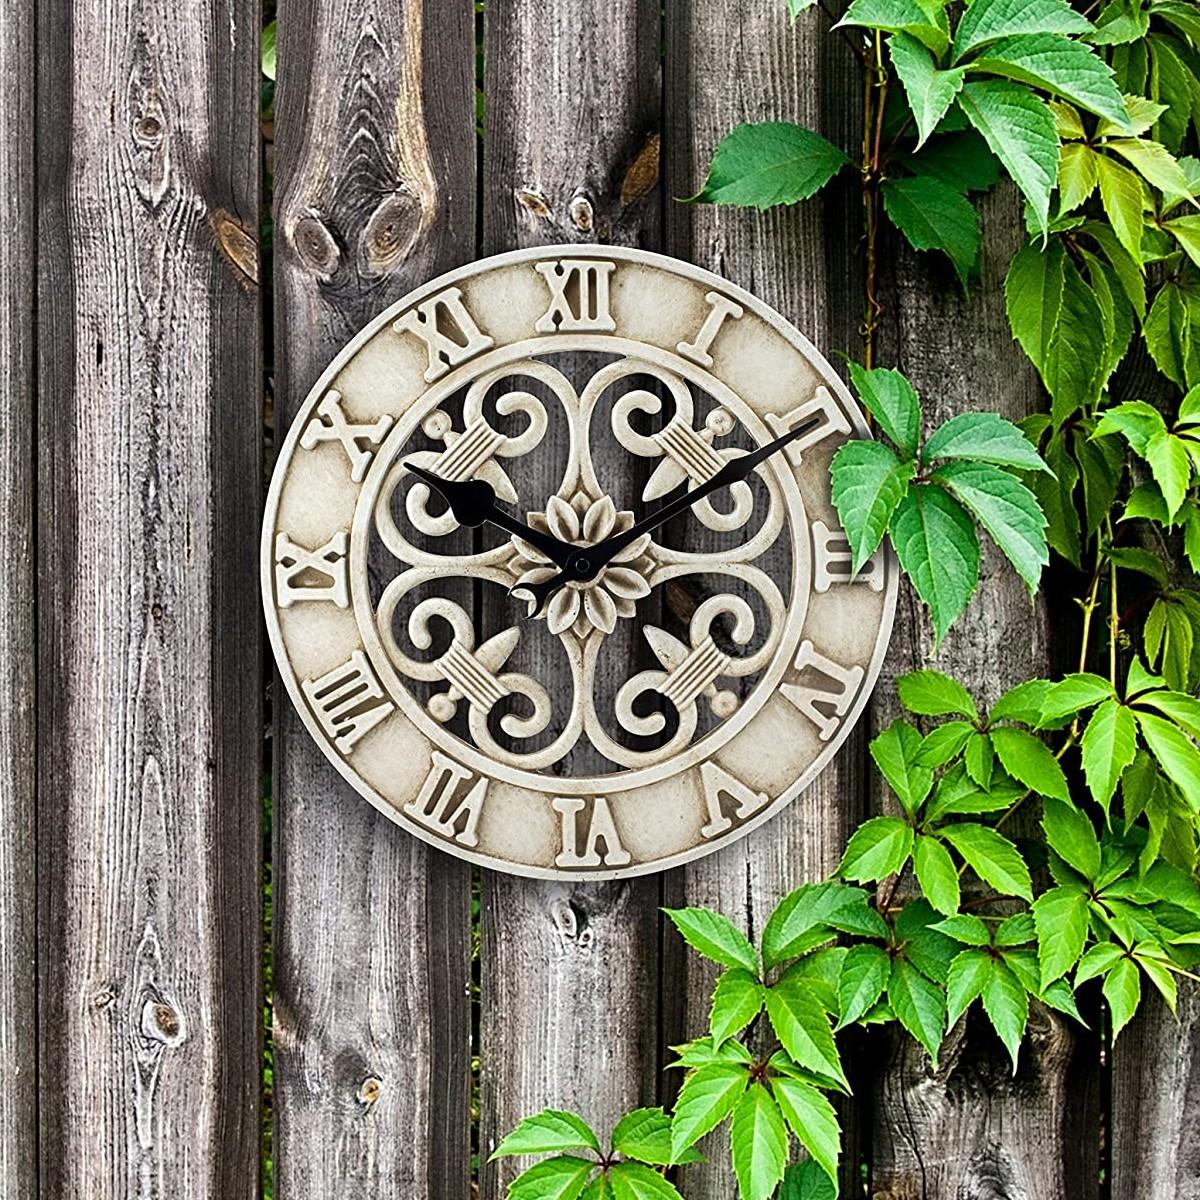 Shiplap Outdoor Thermometer Clock